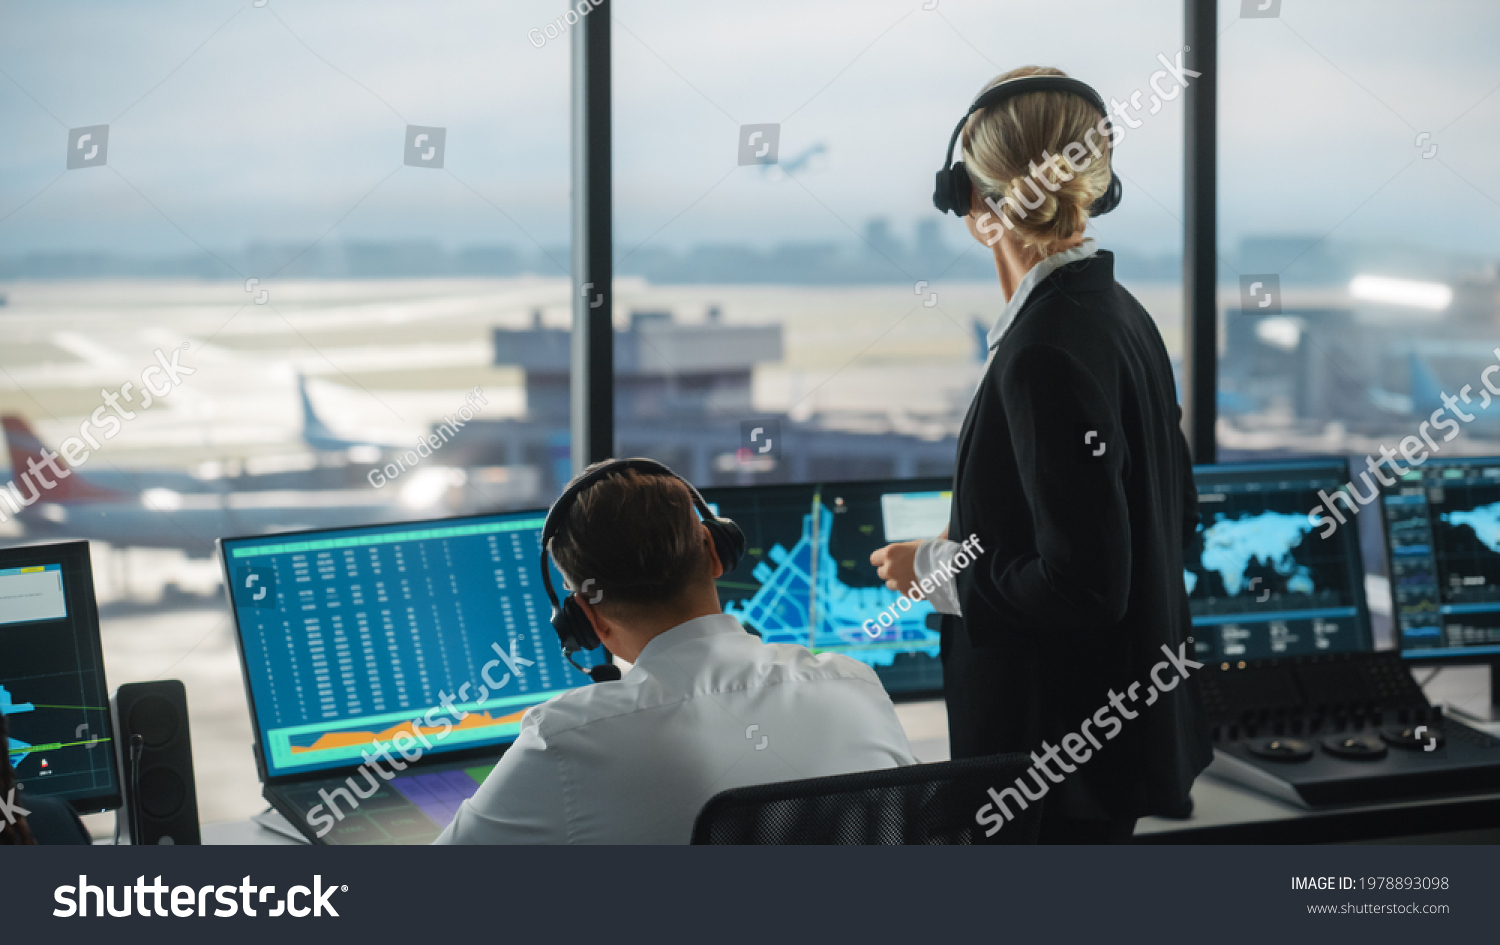 Female and Male Air Traffic Controllers with Headsets Talk in Airport Tower. Office Room is Full of Desktop Computer Displays with Navigation Screens, Airplane Departure and Arrival Data for the Team. #1978893098